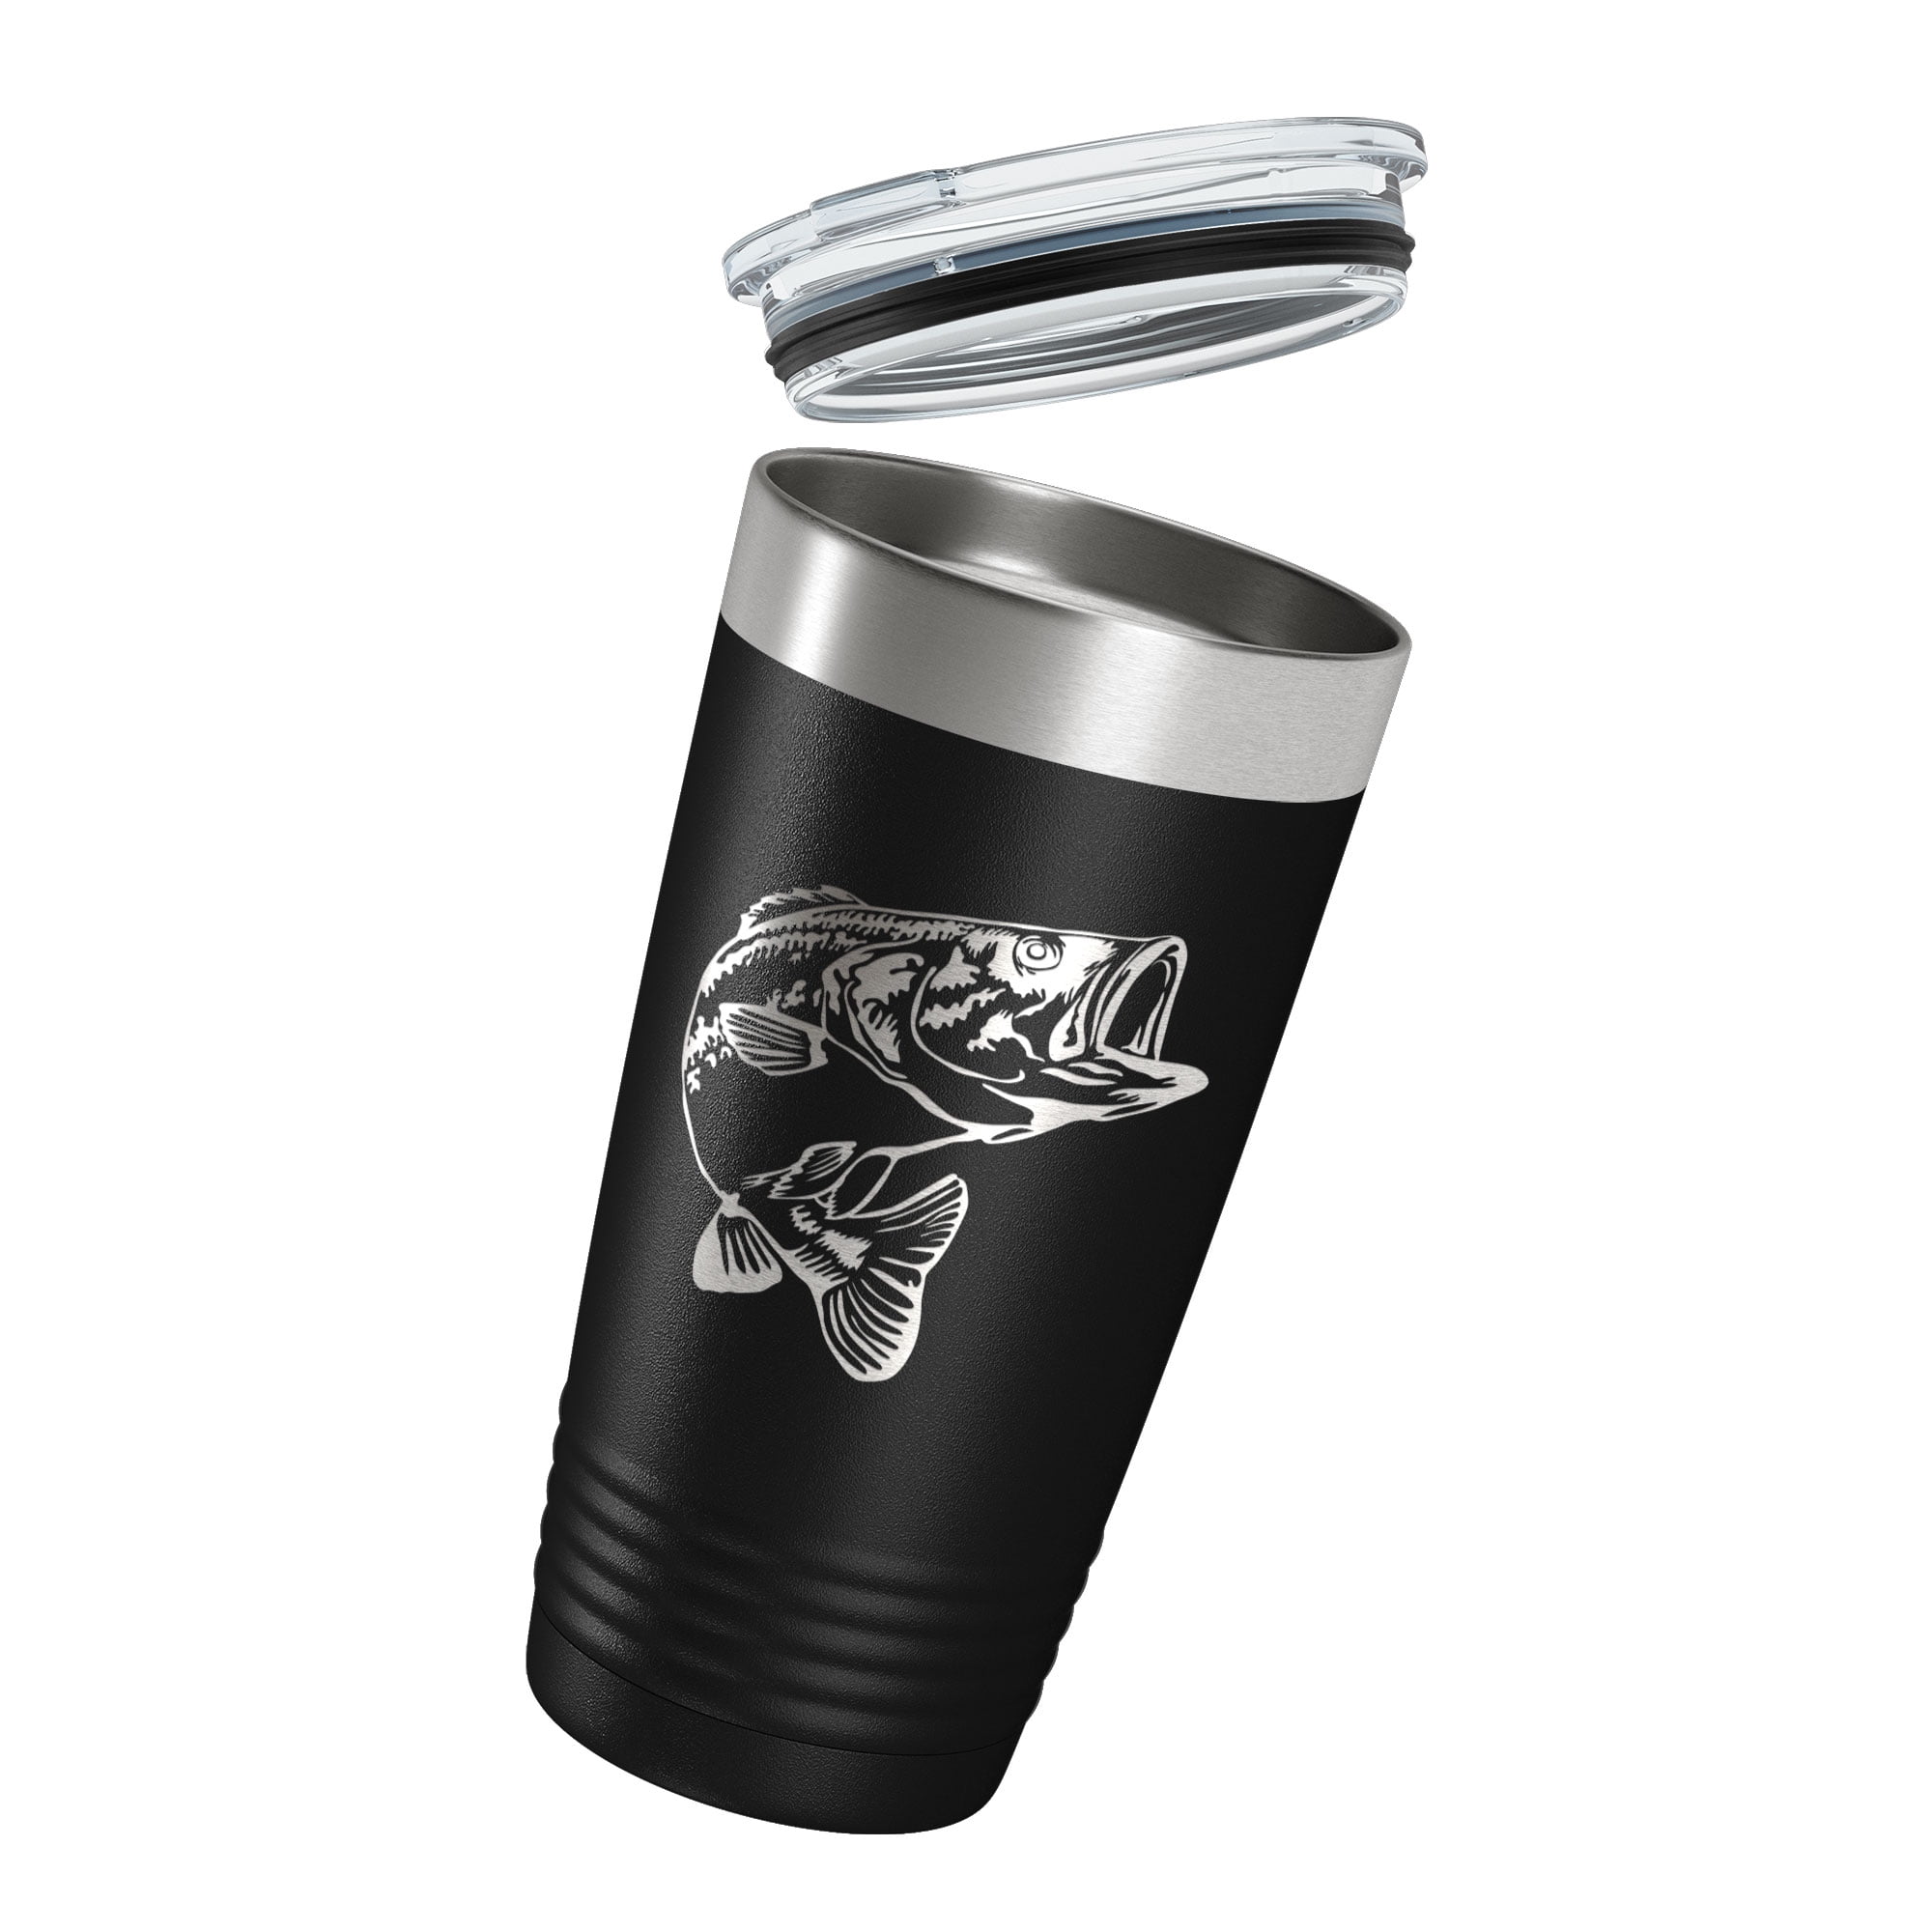 Bass Fishing Coffee Tumbler - The Painted Turtle